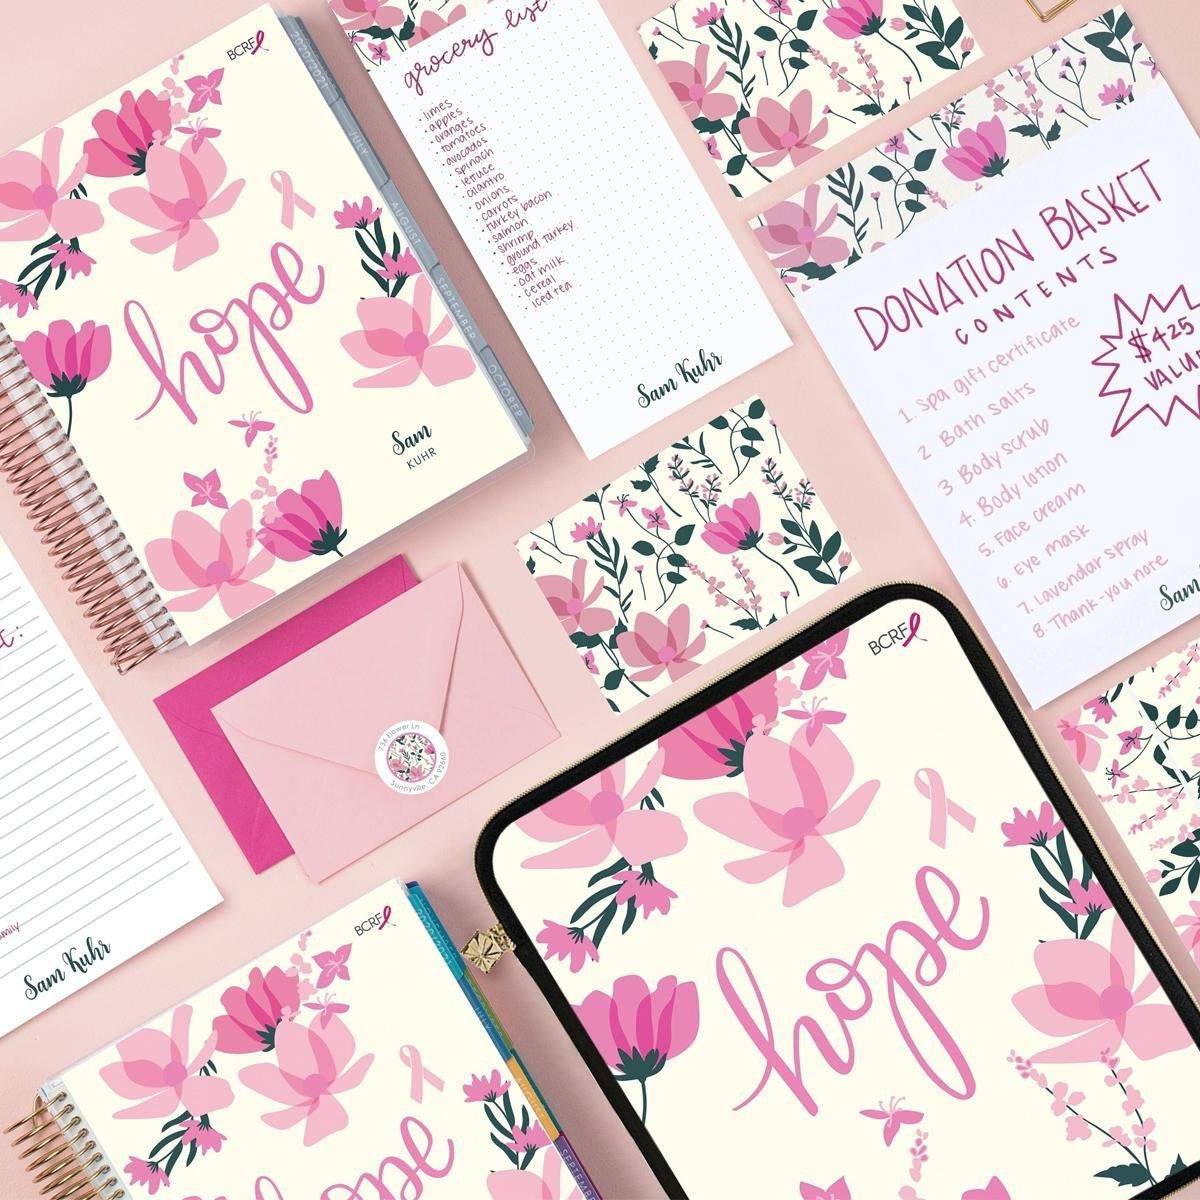 From the Breast Cancer Journal to Covers, Notepads & more, Erin Condren is donating 50% of the purchase price to the Breast Cancer Research Foundation through Oct 31, 2020 to help fund the cure.